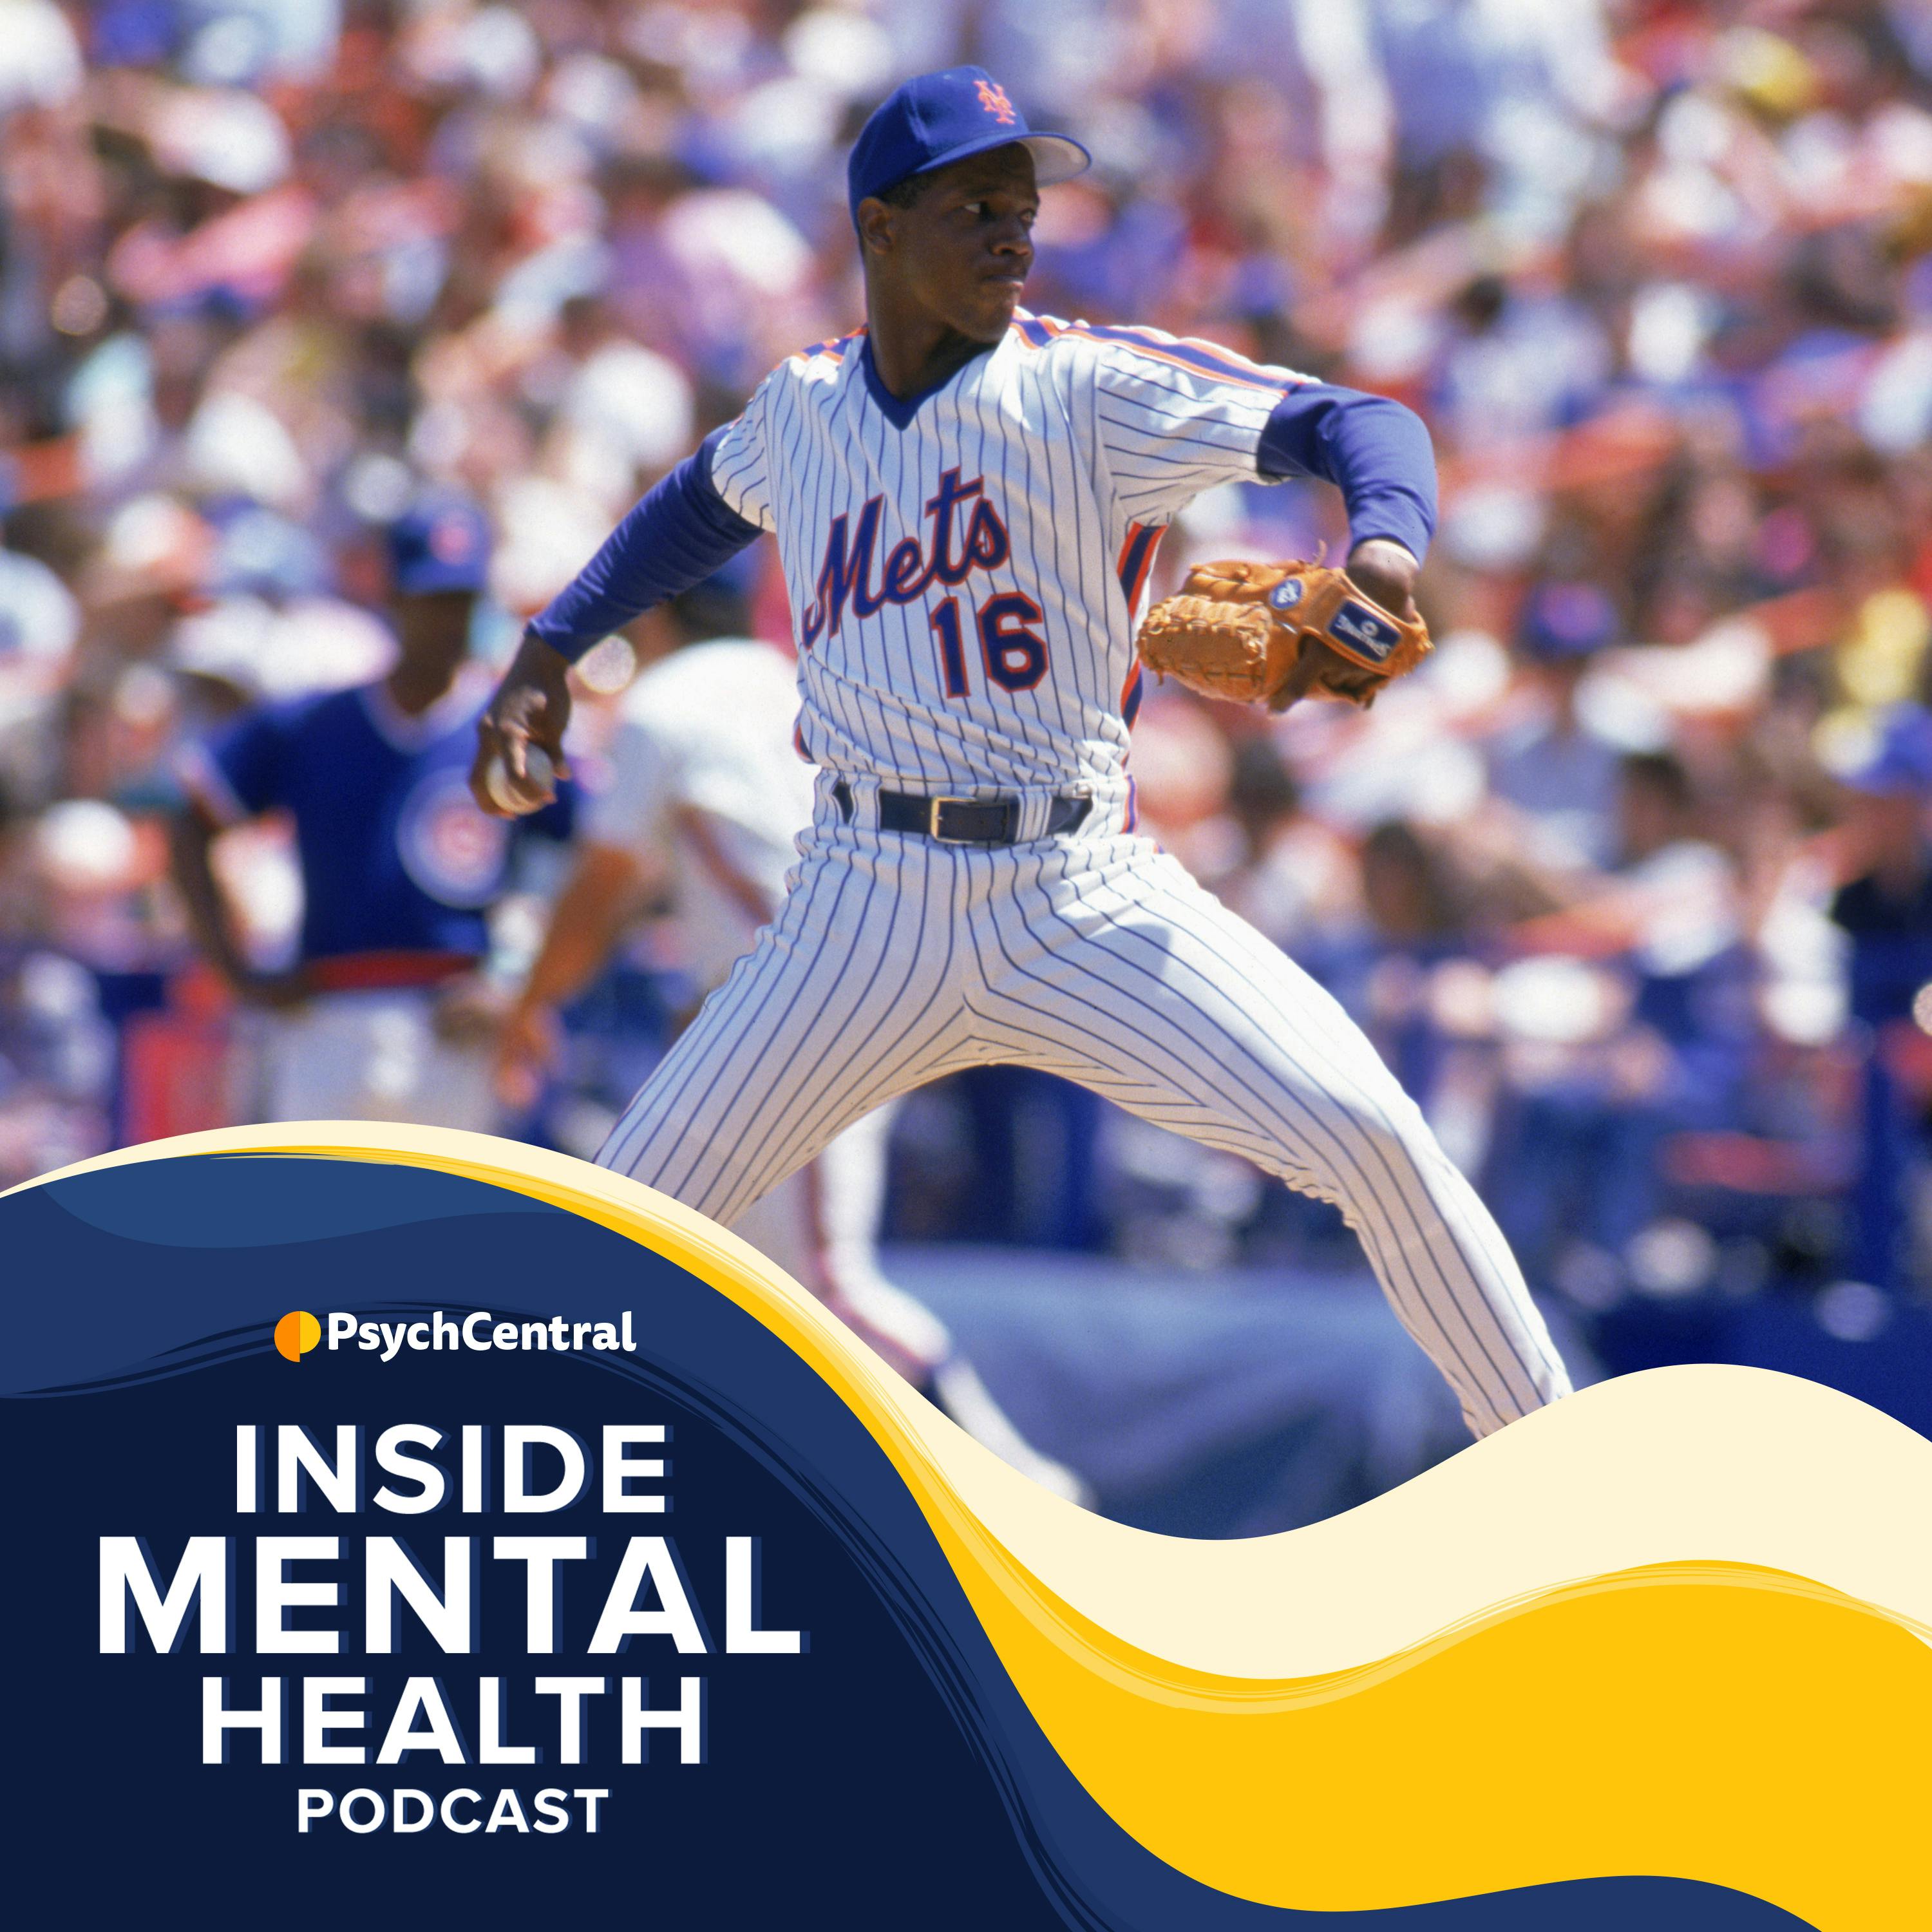 Baseball’s Doc Gooden’s Journey from Star Pitcher to Mental Health Advocate